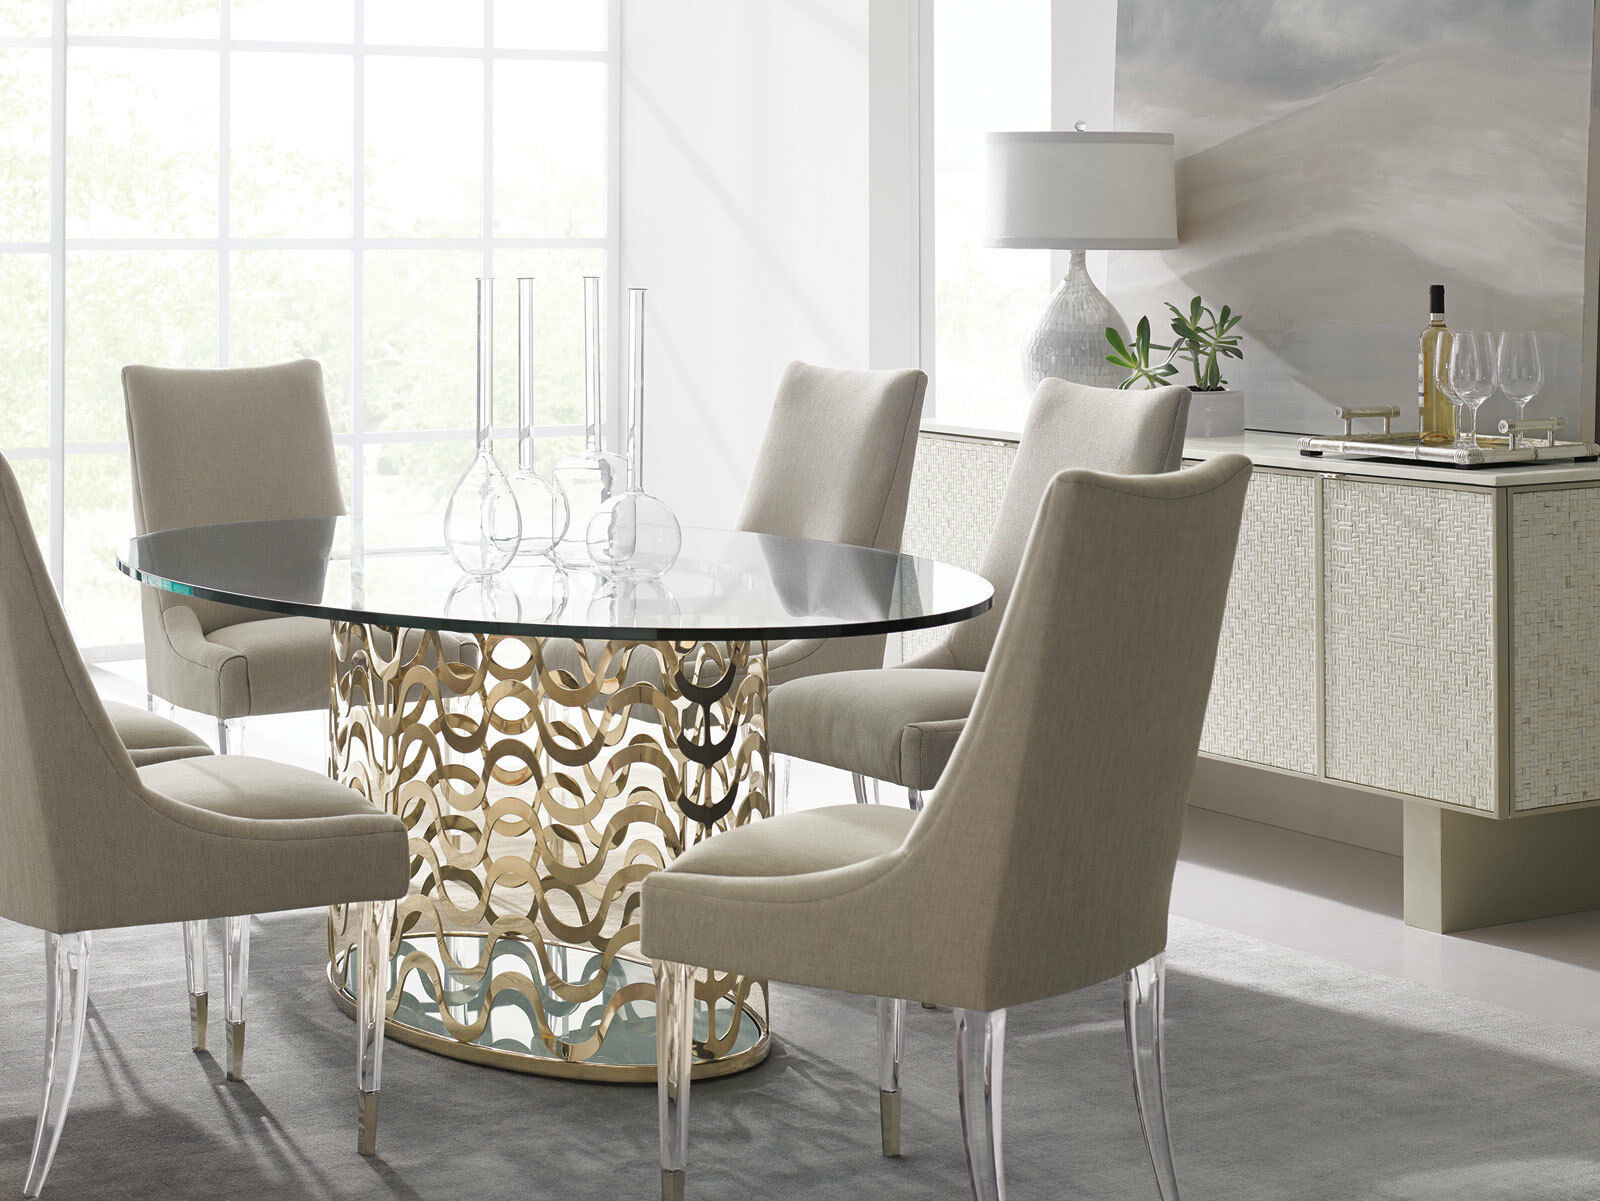 LOUIS 7 pieces Modern Dining Room Set - GOLD Oval Glass Top Table